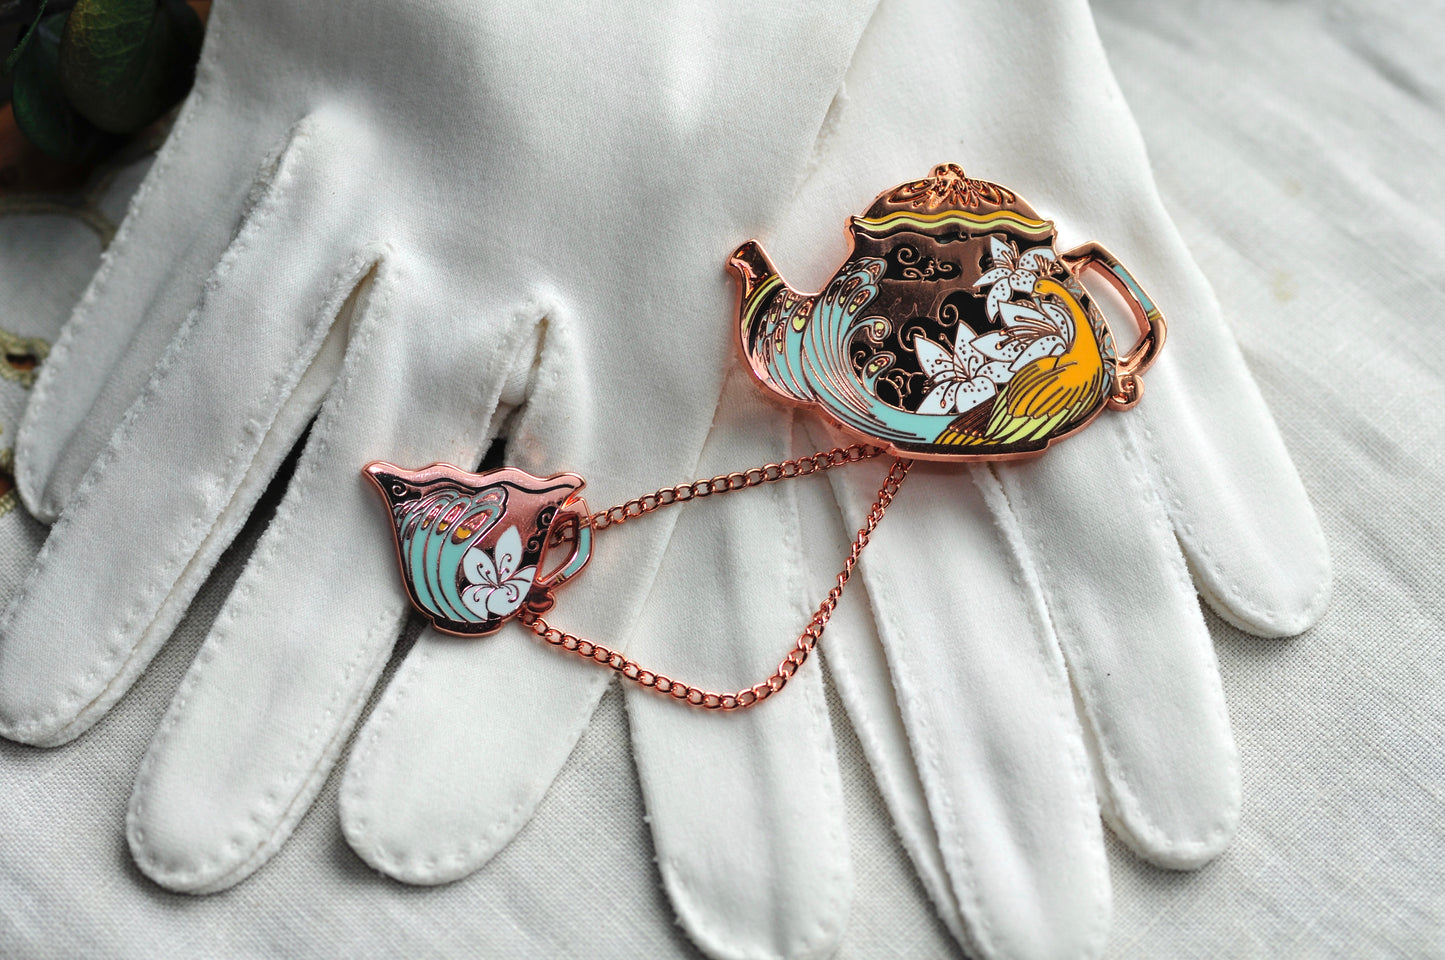 Pin - Teapot and Teacup with chain